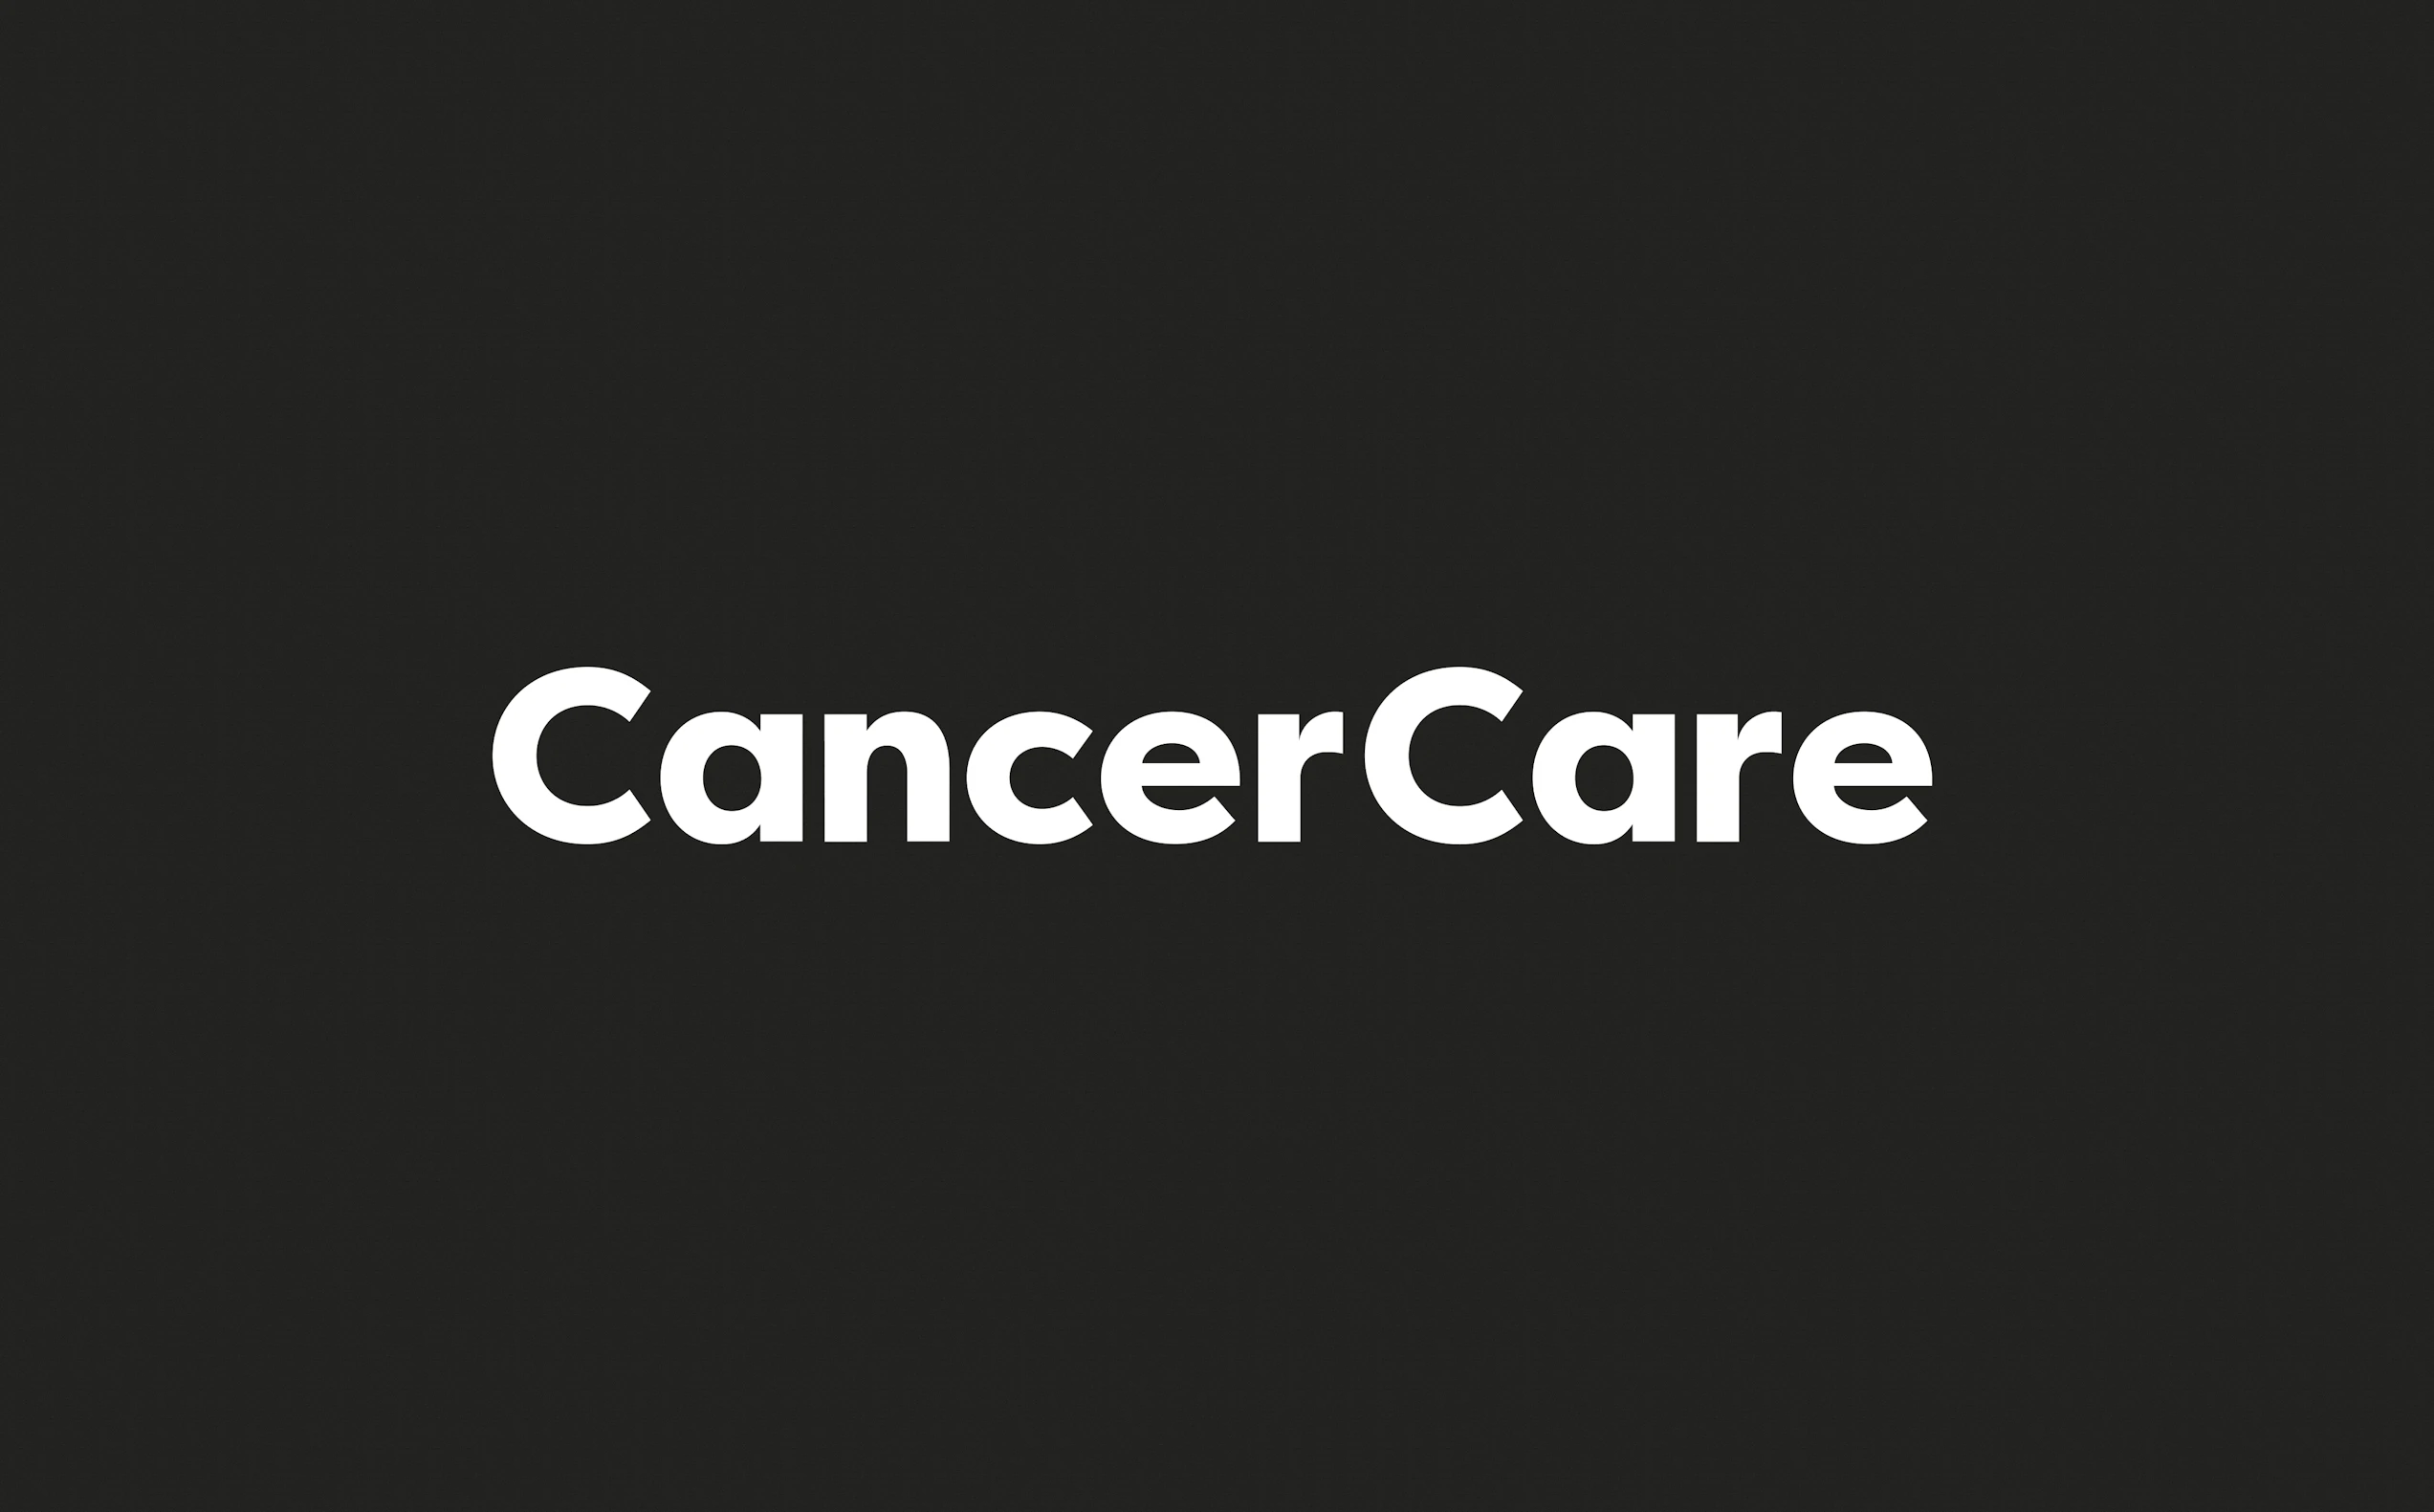 Cover Image for EXP helping CancerCare rebrand